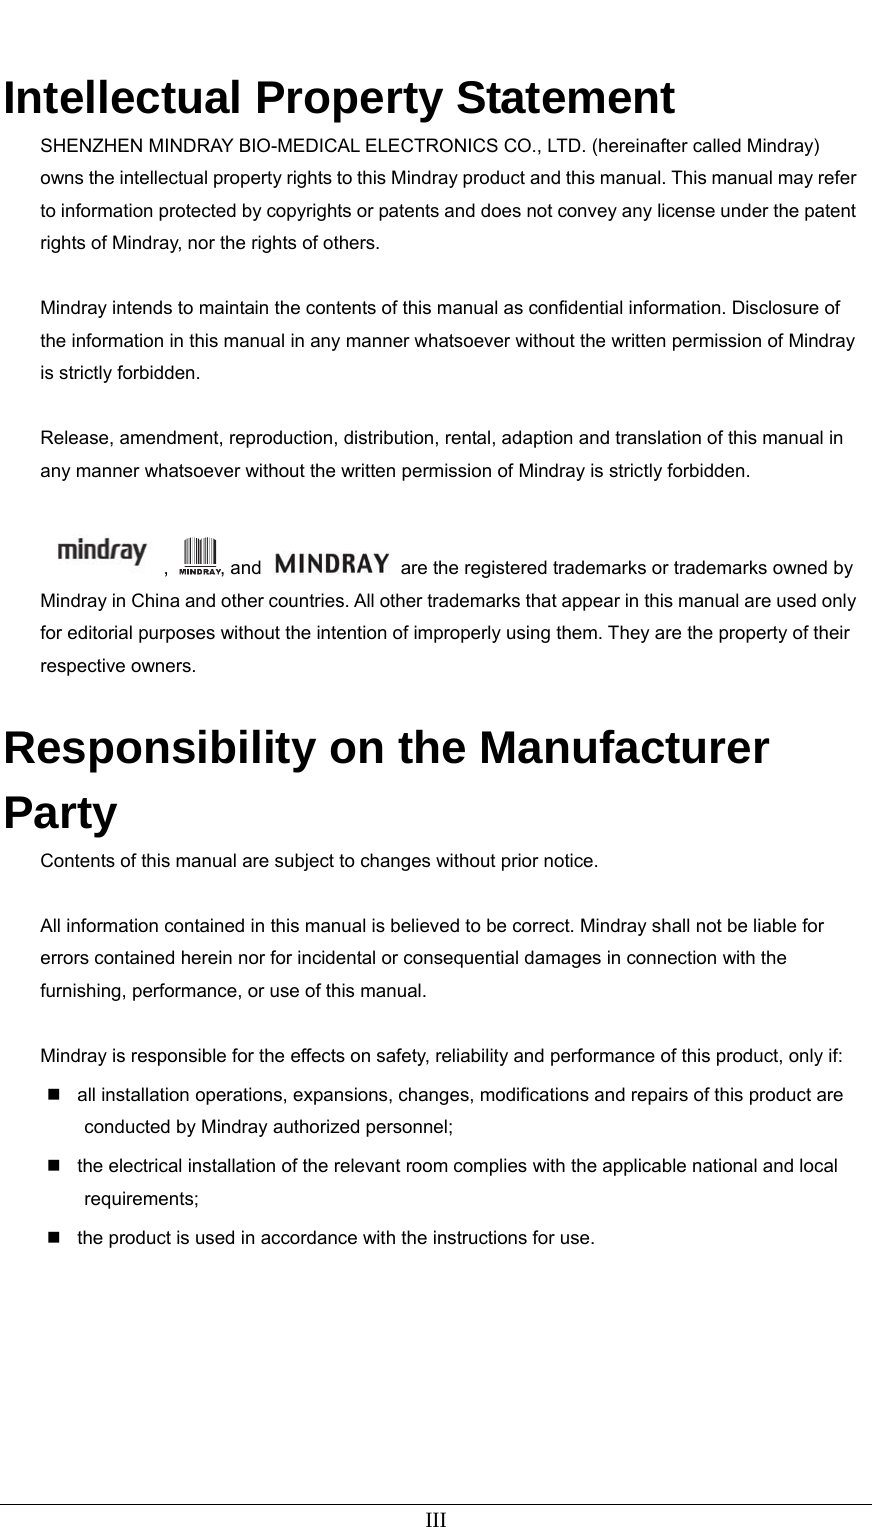   III  Intellectual Property Statement SHENZHEN MINDRAY BIO-MEDICAL ELECTRONICS CO., LTD. (hereinafter called Mindray) owns the intellectual property rights to this Mindray product and this manual. This manual may refer to information protected by copyrights or patents and does not convey any license under the patent rights of Mindray, nor the rights of others.    Mindray intends to maintain the contents of this manual as confidential information. Disclosure of the information in this manual in any manner whatsoever without the written permission of Mindray is strictly forbidden.    Release, amendment, reproduction, distribution, rental, adaption and translation of this manual in any manner whatsoever without the written permission of Mindray is strictly forbidden.  ,  , and    are the registered trademarks or trademarks owned by Mindray in China and other countries. All other trademarks that appear in this manual are used only for editorial purposes without the intention of improperly using them. They are the property of their respective owners.  Responsibility on the Manufacturer Party Contents of this manual are subject to changes without prior notice.  All information contained in this manual is believed to be correct. Mindray shall not be liable for errors contained herein nor for incidental or consequential damages in connection with the furnishing, performance, or use of this manual.  Mindray is responsible for the effects on safety, reliability and performance of this product, only if:   all installation operations, expansions, changes, modifications and repairs of this product are conducted by Mindray authorized personnel;   the electrical installation of the relevant room complies with the applicable national and local requirements;   the product is used in accordance with the instructions for use. 